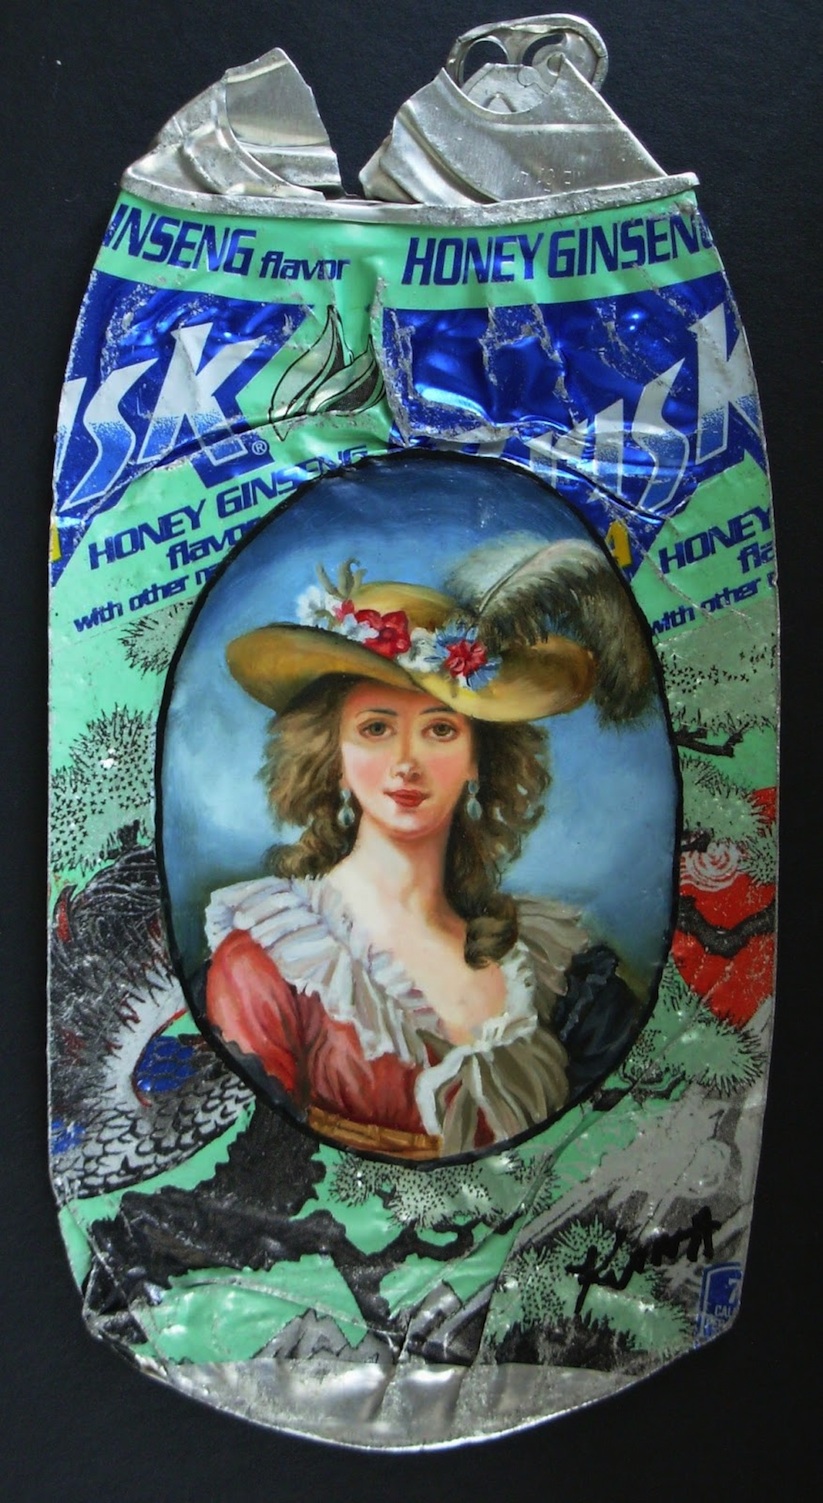 New_Historical_Portraits_on_Flattened_Cans_by_Kim_Alsbrooks_2015_09